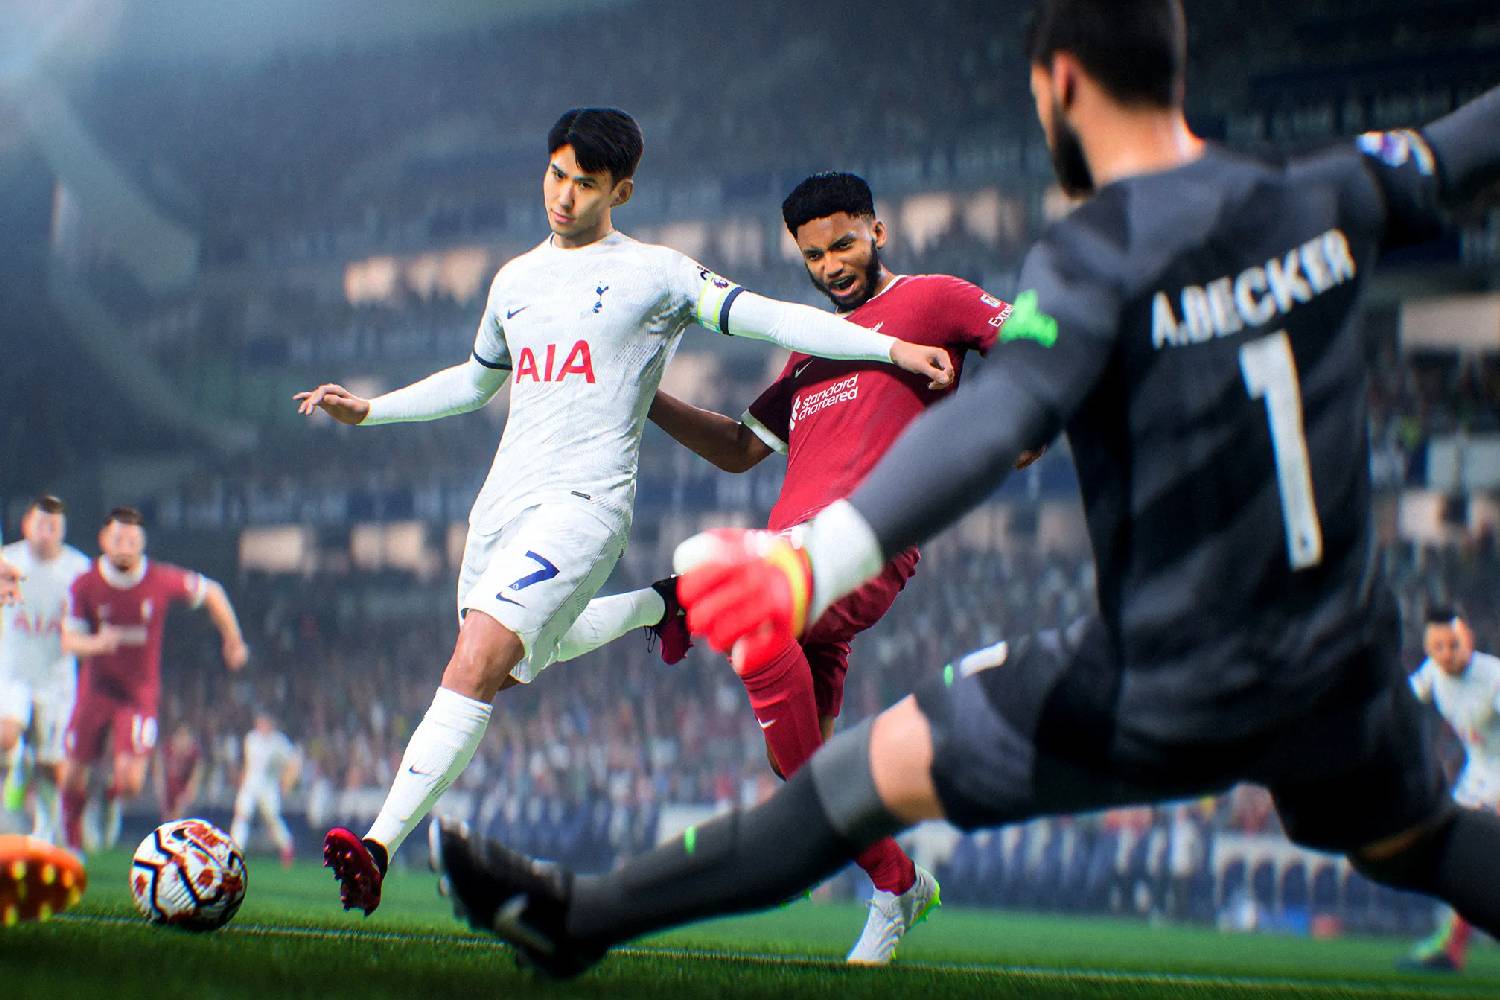 Tottenham's Son lines up a shot against Liverpool's goalkeeper Alisson.